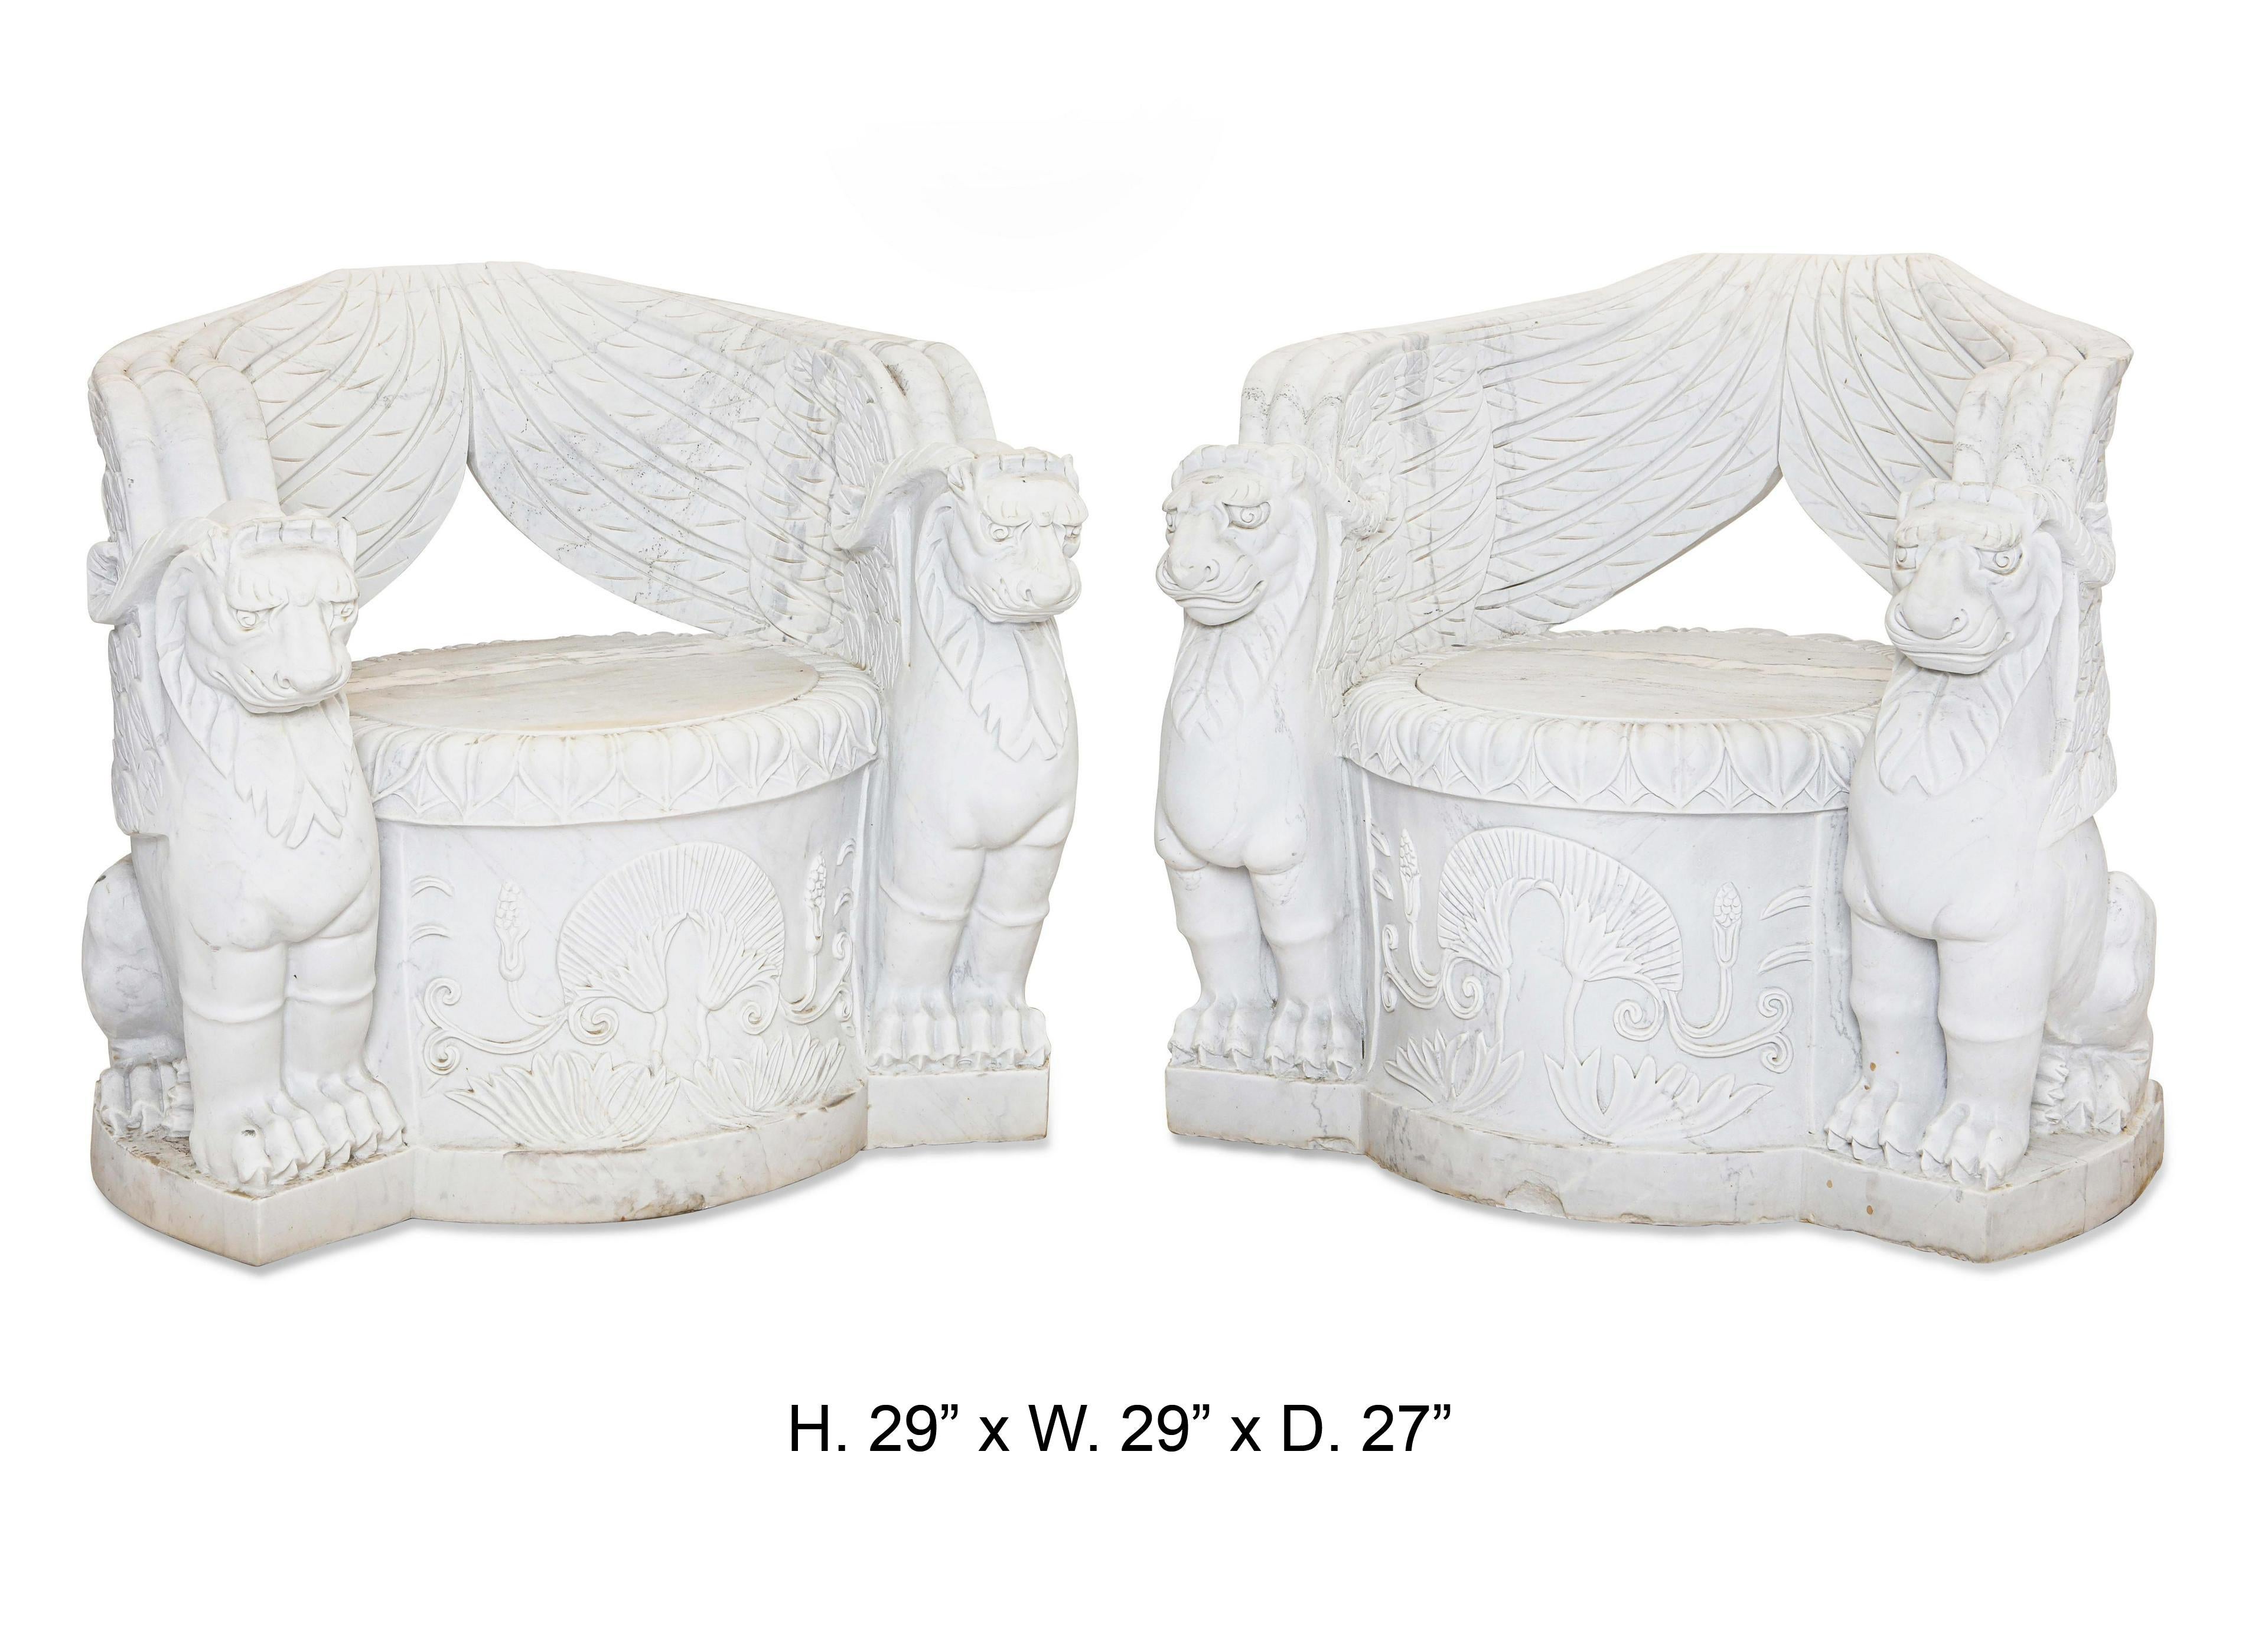 Impressive pair of Empire style carved white marble chairs.
The beautifully hand carved white marble chair decorated with a foliage motif is flanked by two large seated winged griffins under each arm,
20th century.
Each chair is carved from a